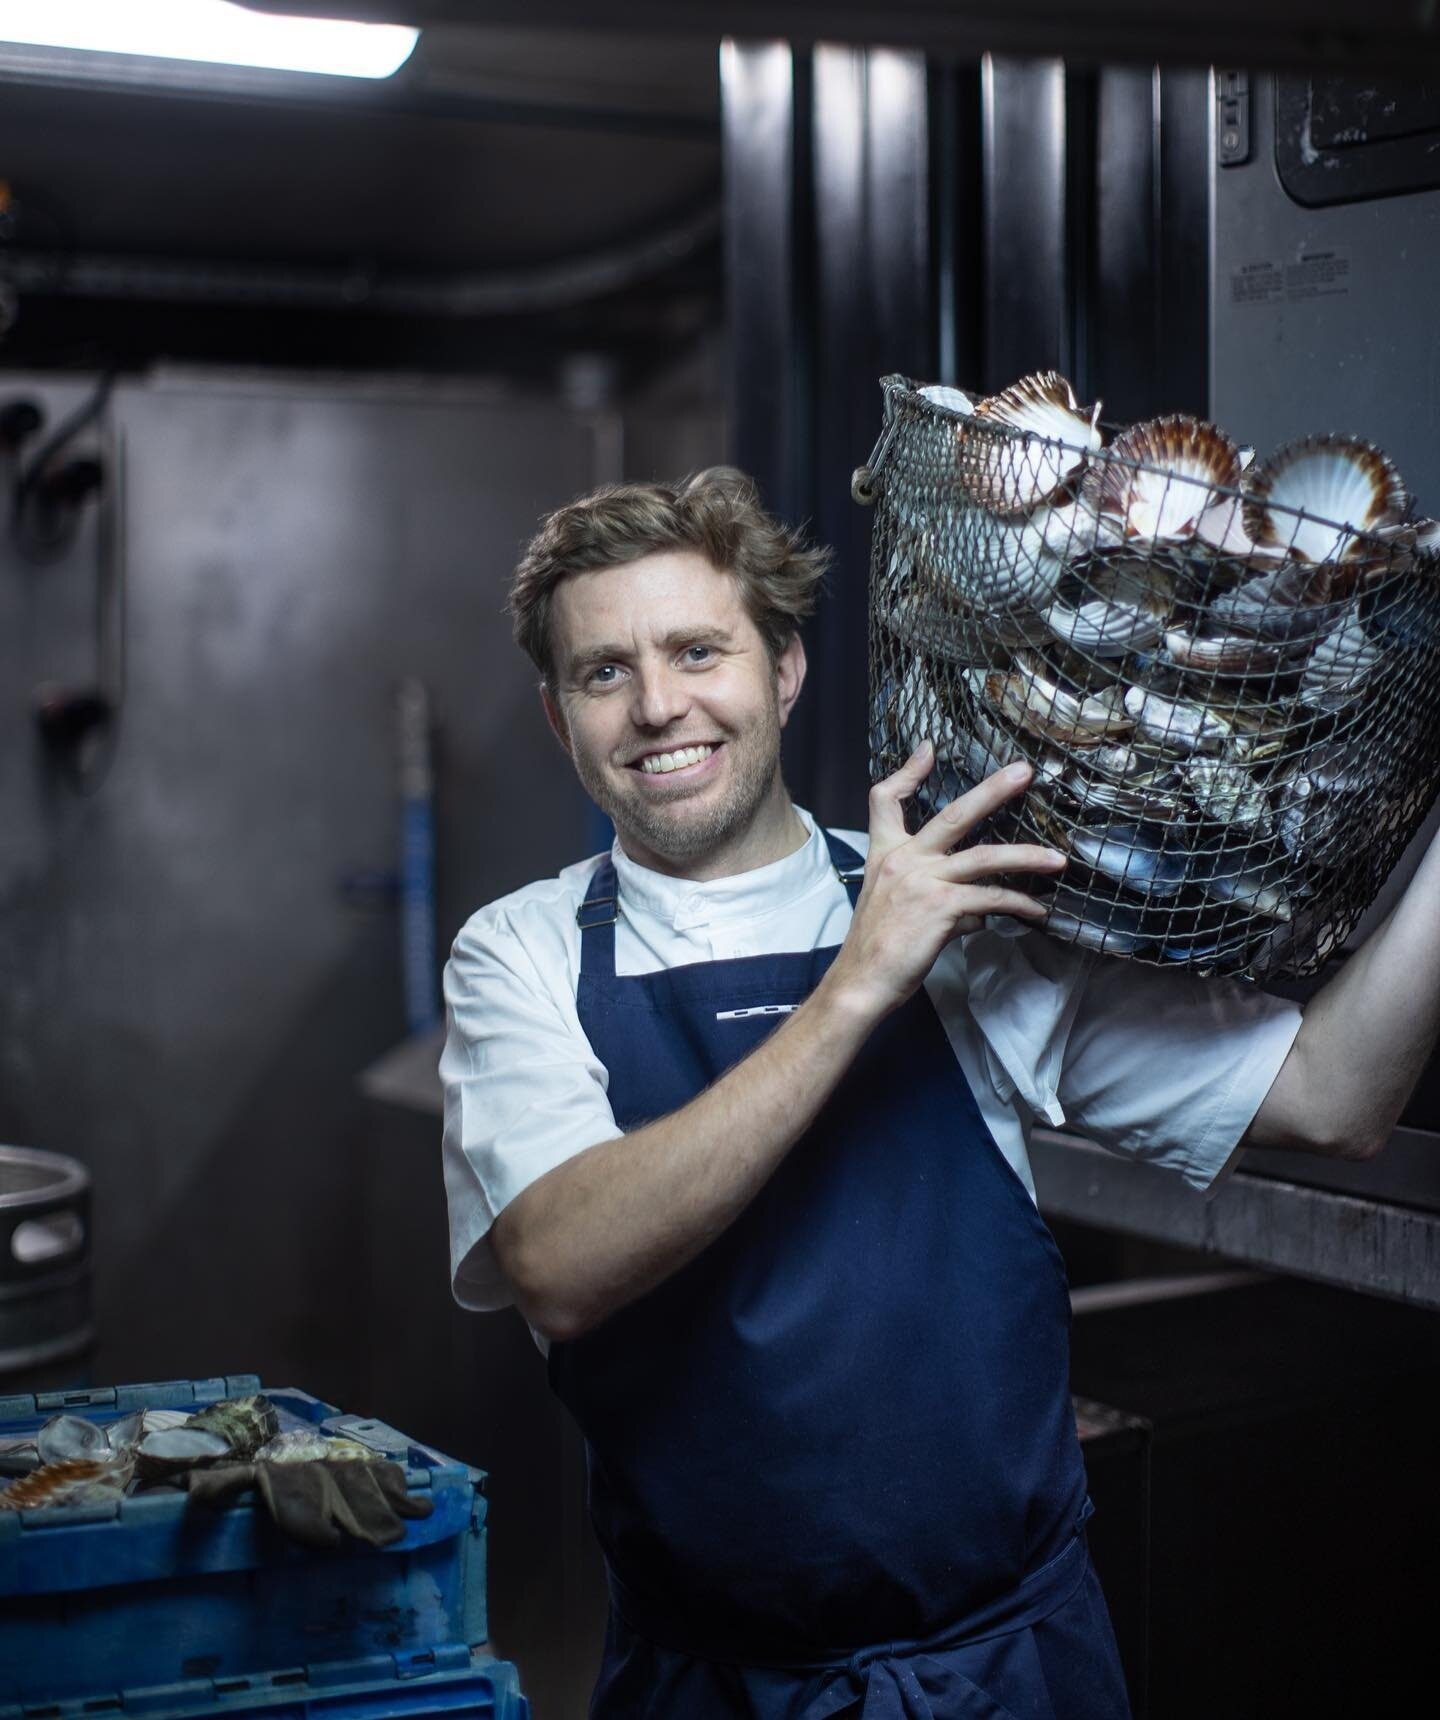 We love when chefs and restaurants in the cooking industry are just as passionate about sustainability as we are! Our friends over at @stokehouserestaurants are deeply committed to sustainability in all aspects of their operations. ⁠
⁠
One way they d